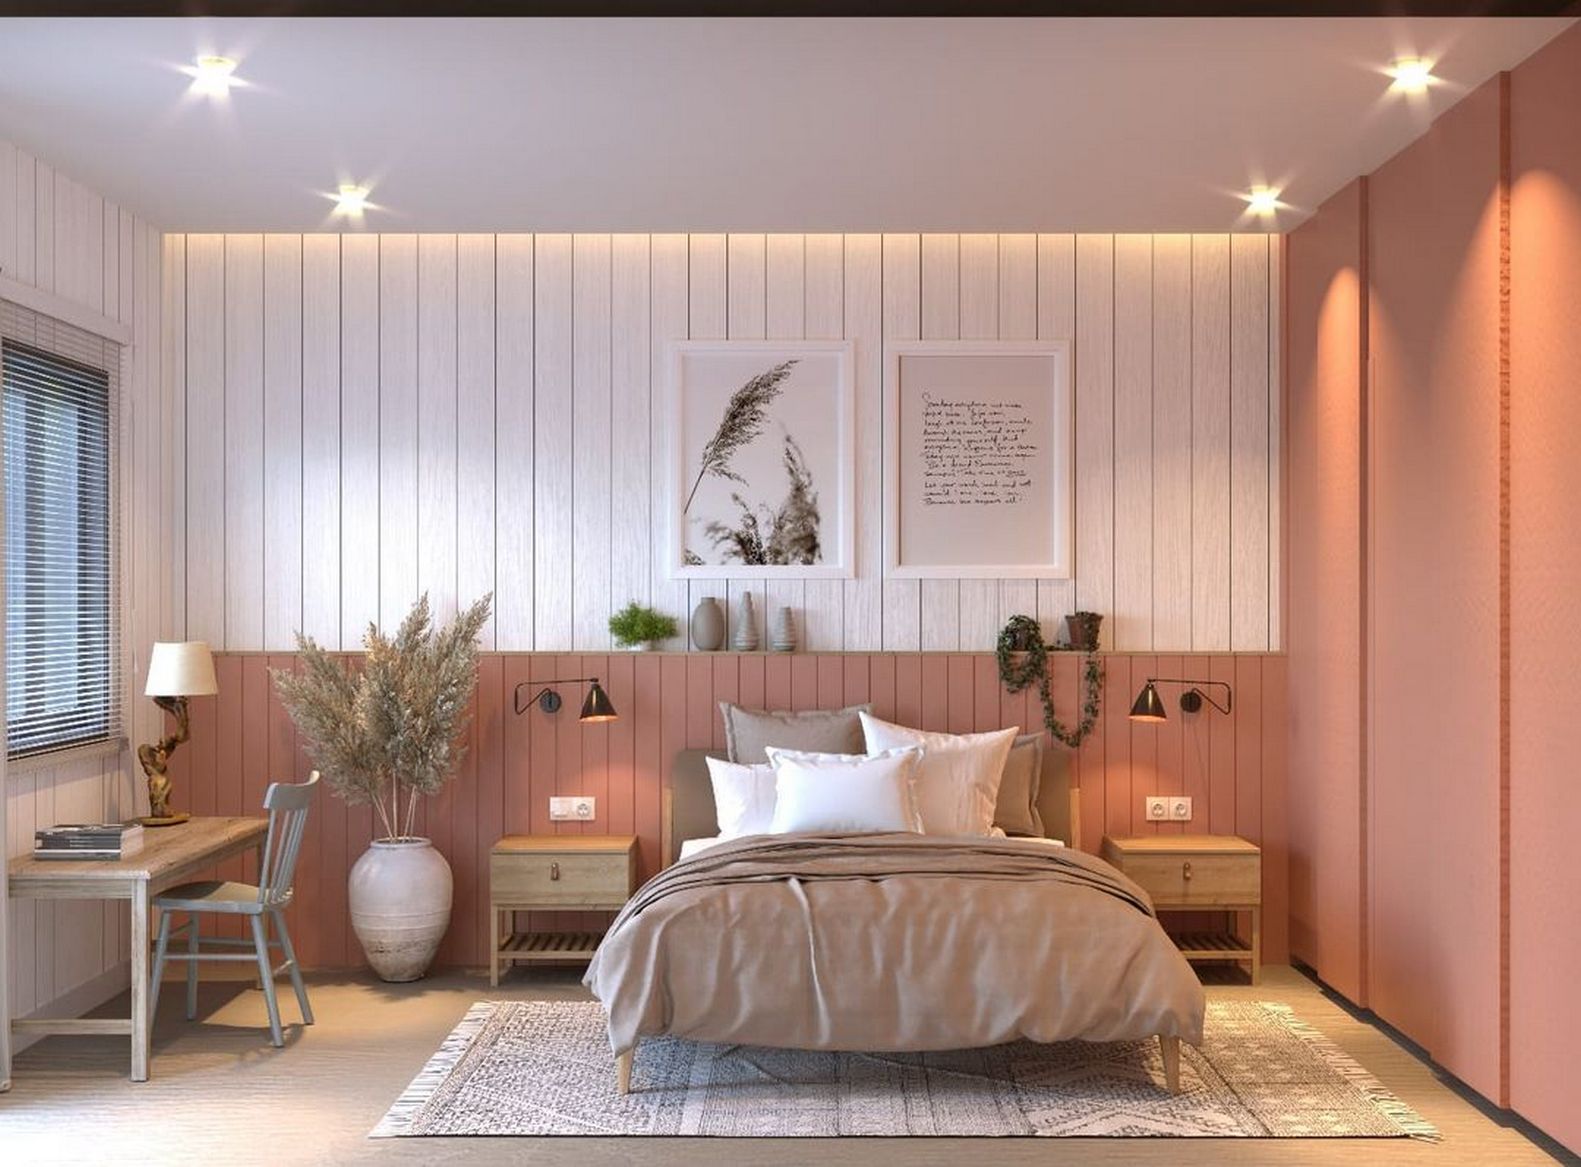 The Best Ways to Decorate Small Bedrooms